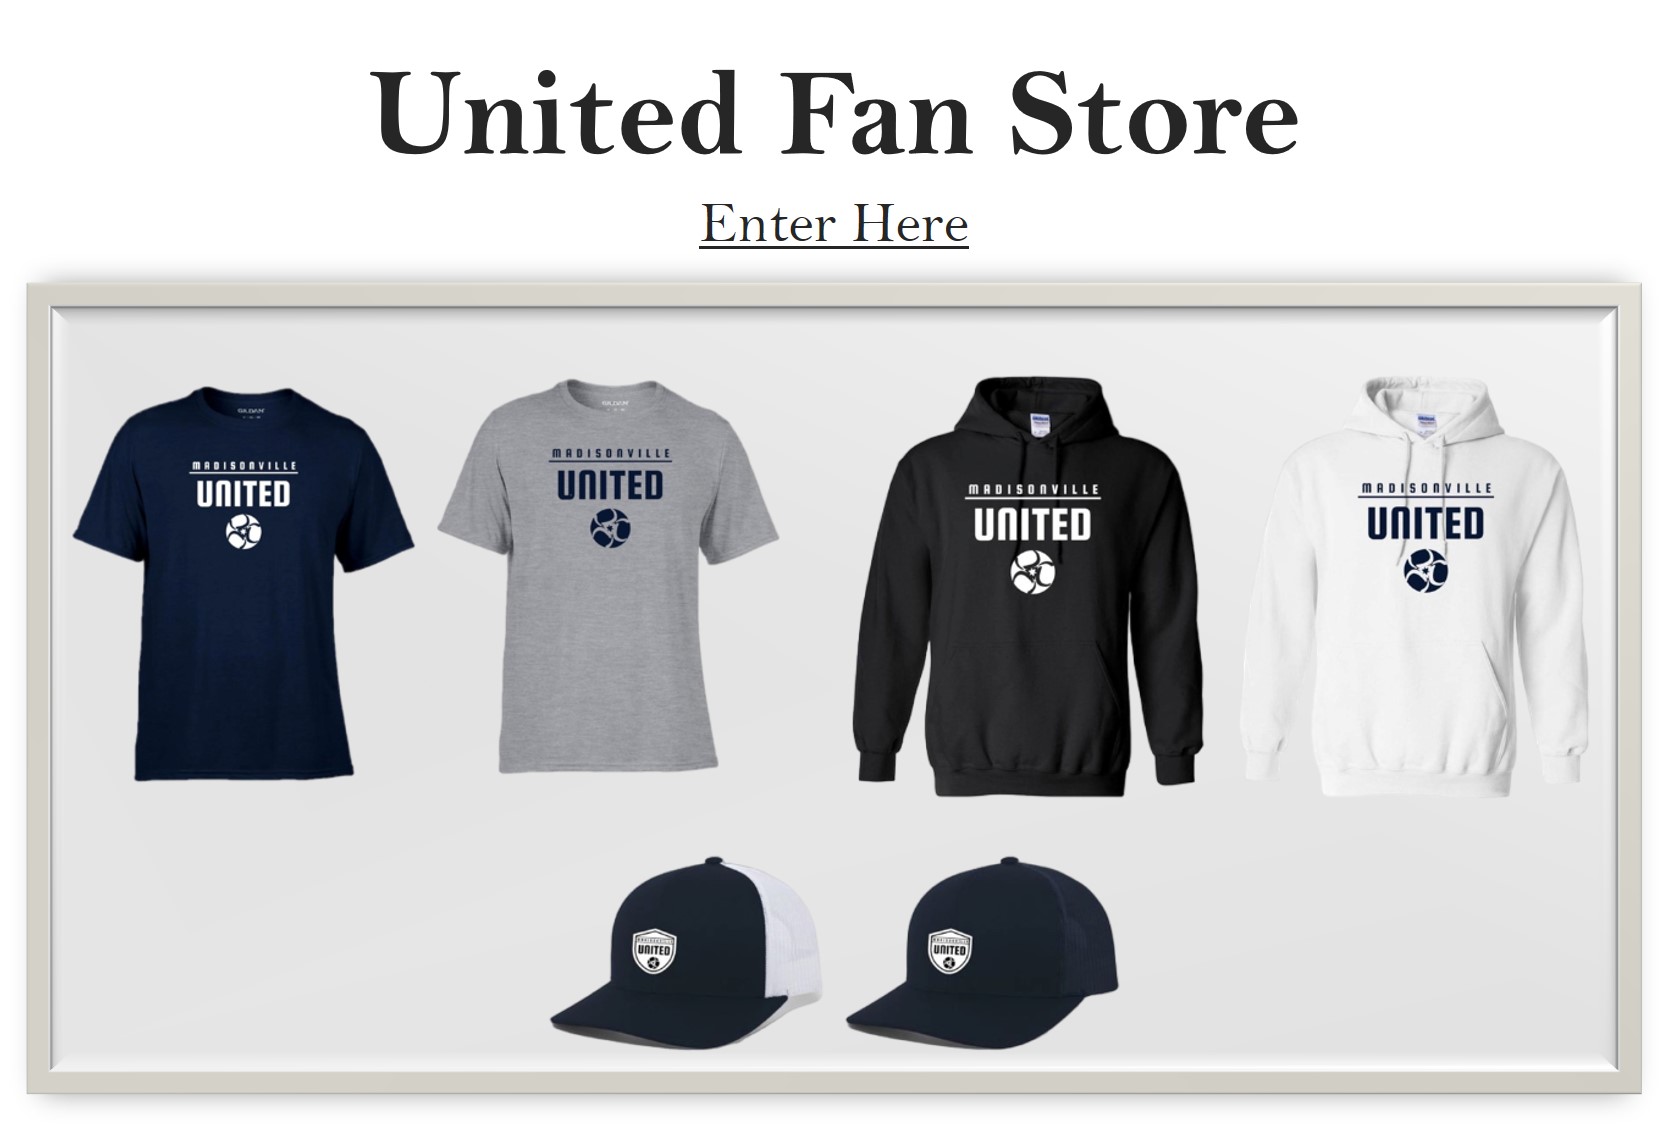 Pic of items for sale in the United Fan Store